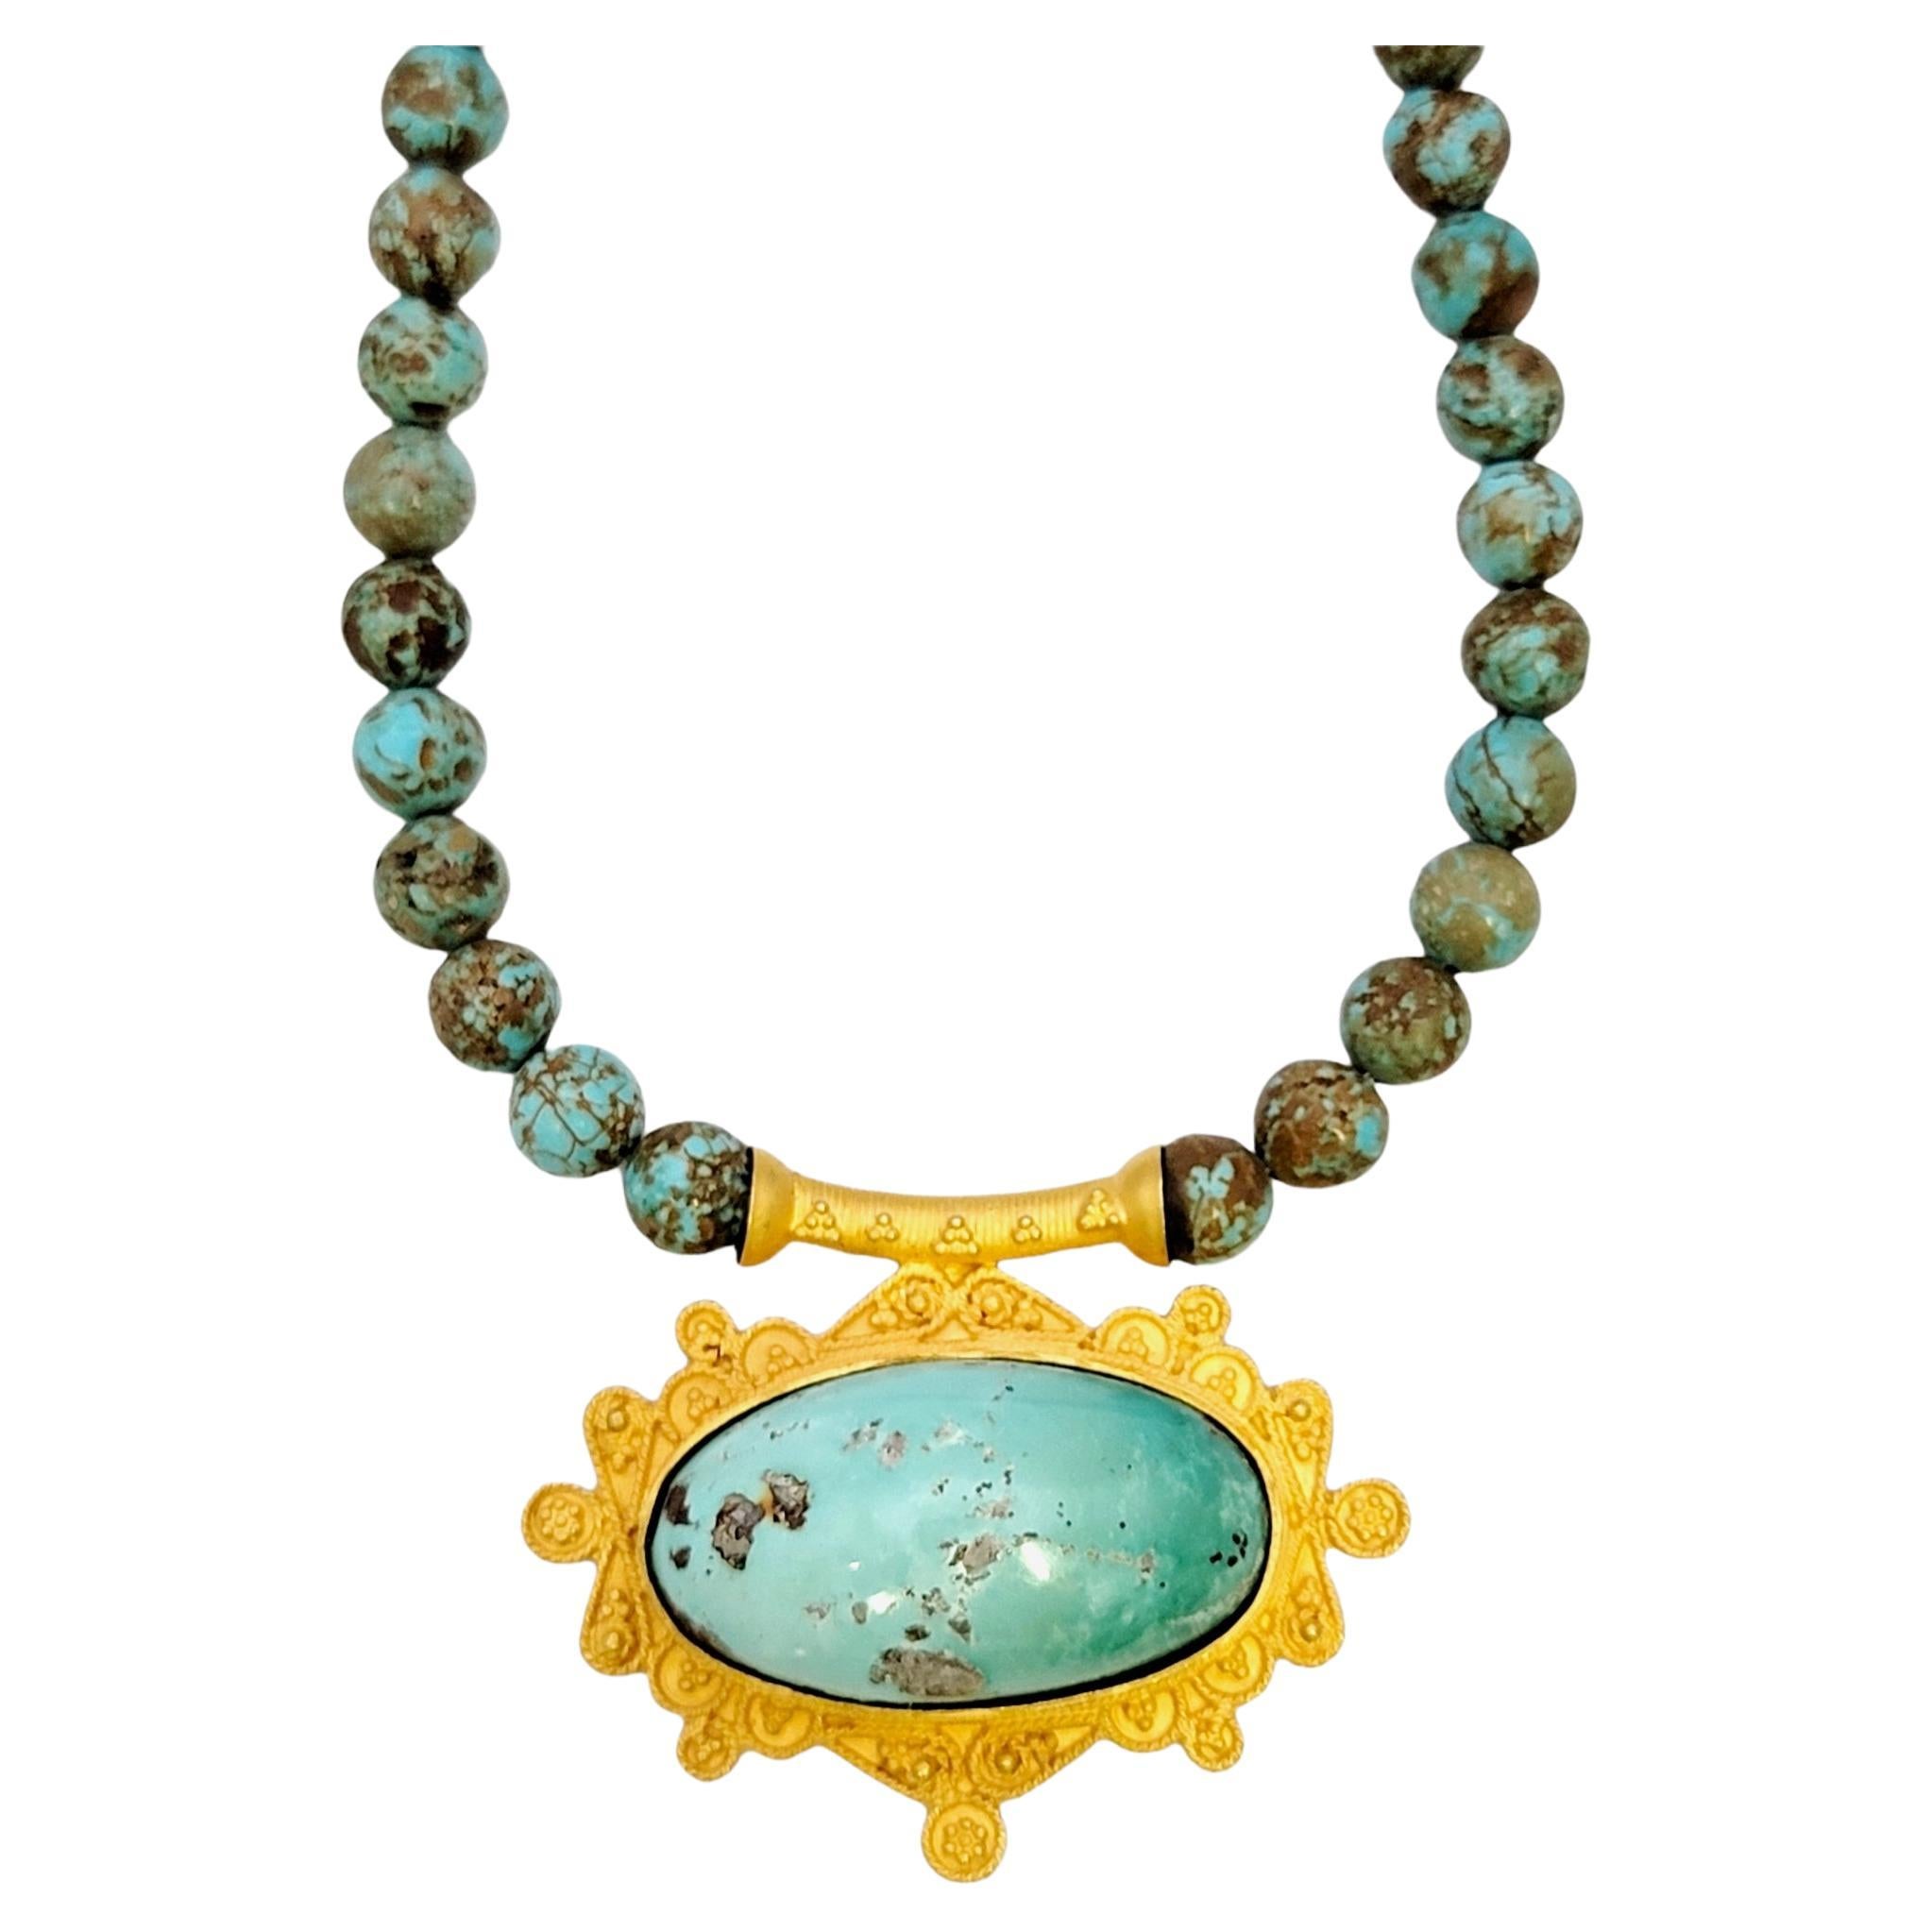 Natural Turquoise Beaded Necklace with Ornate 18 Karat Yellow Gold Pendant